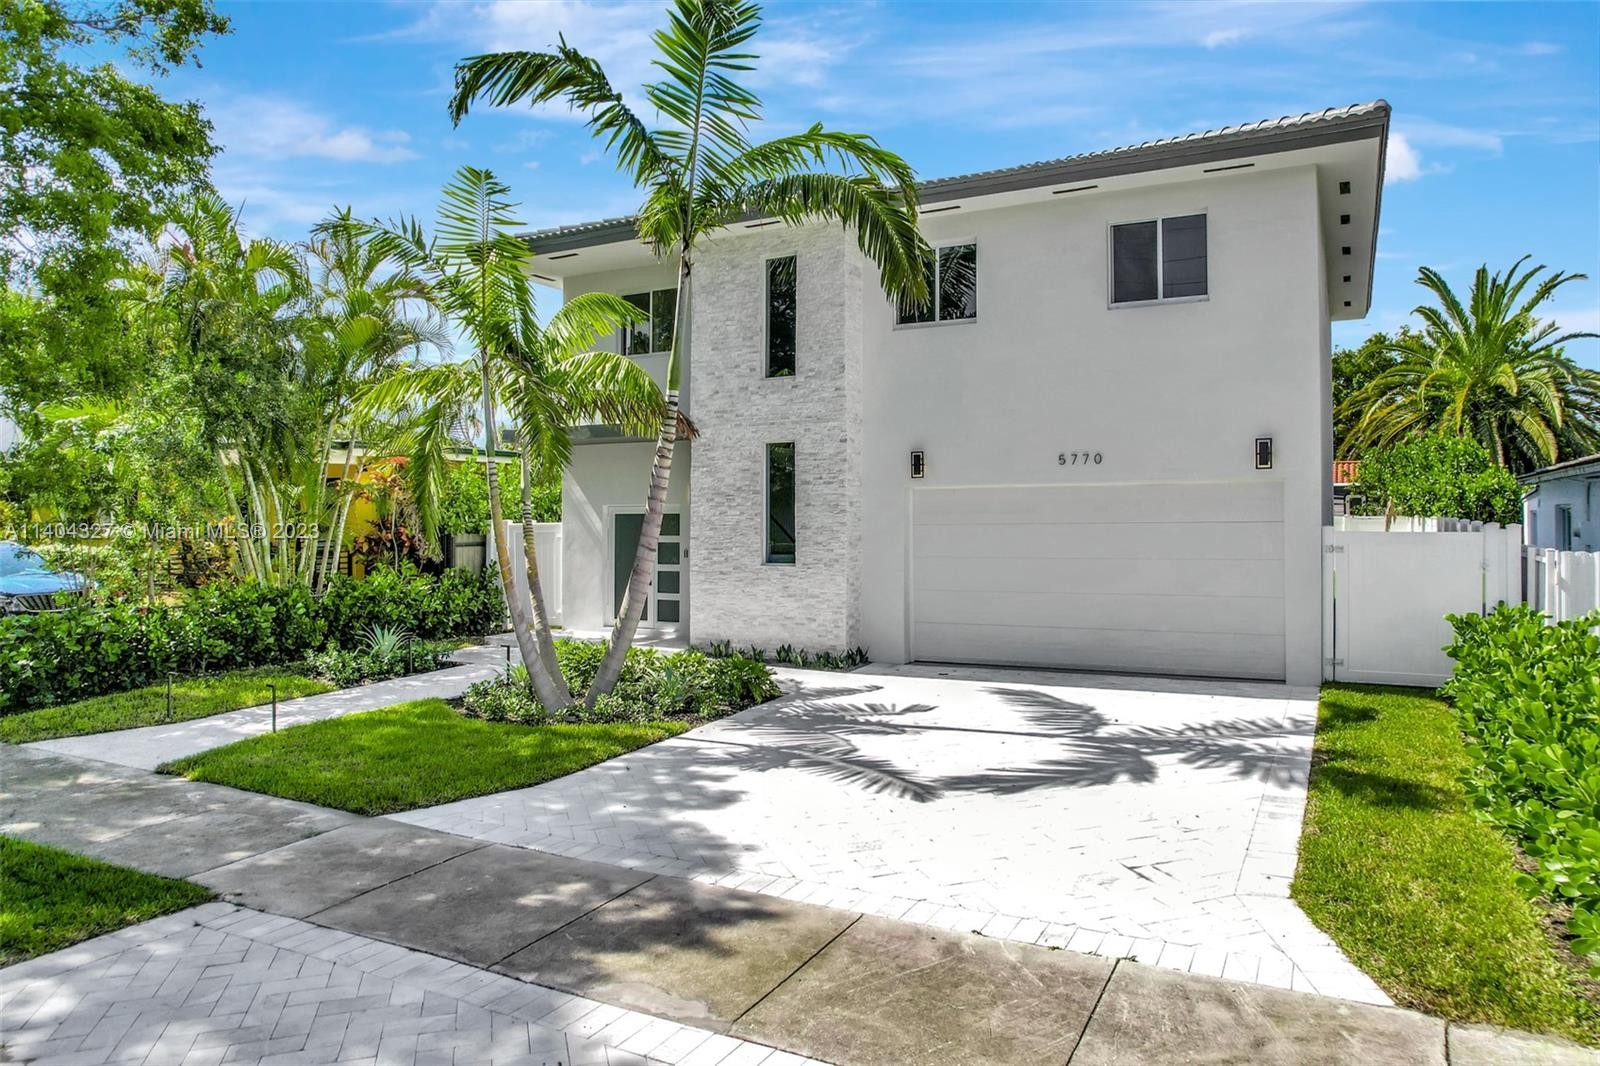 West Miami Home For Sale